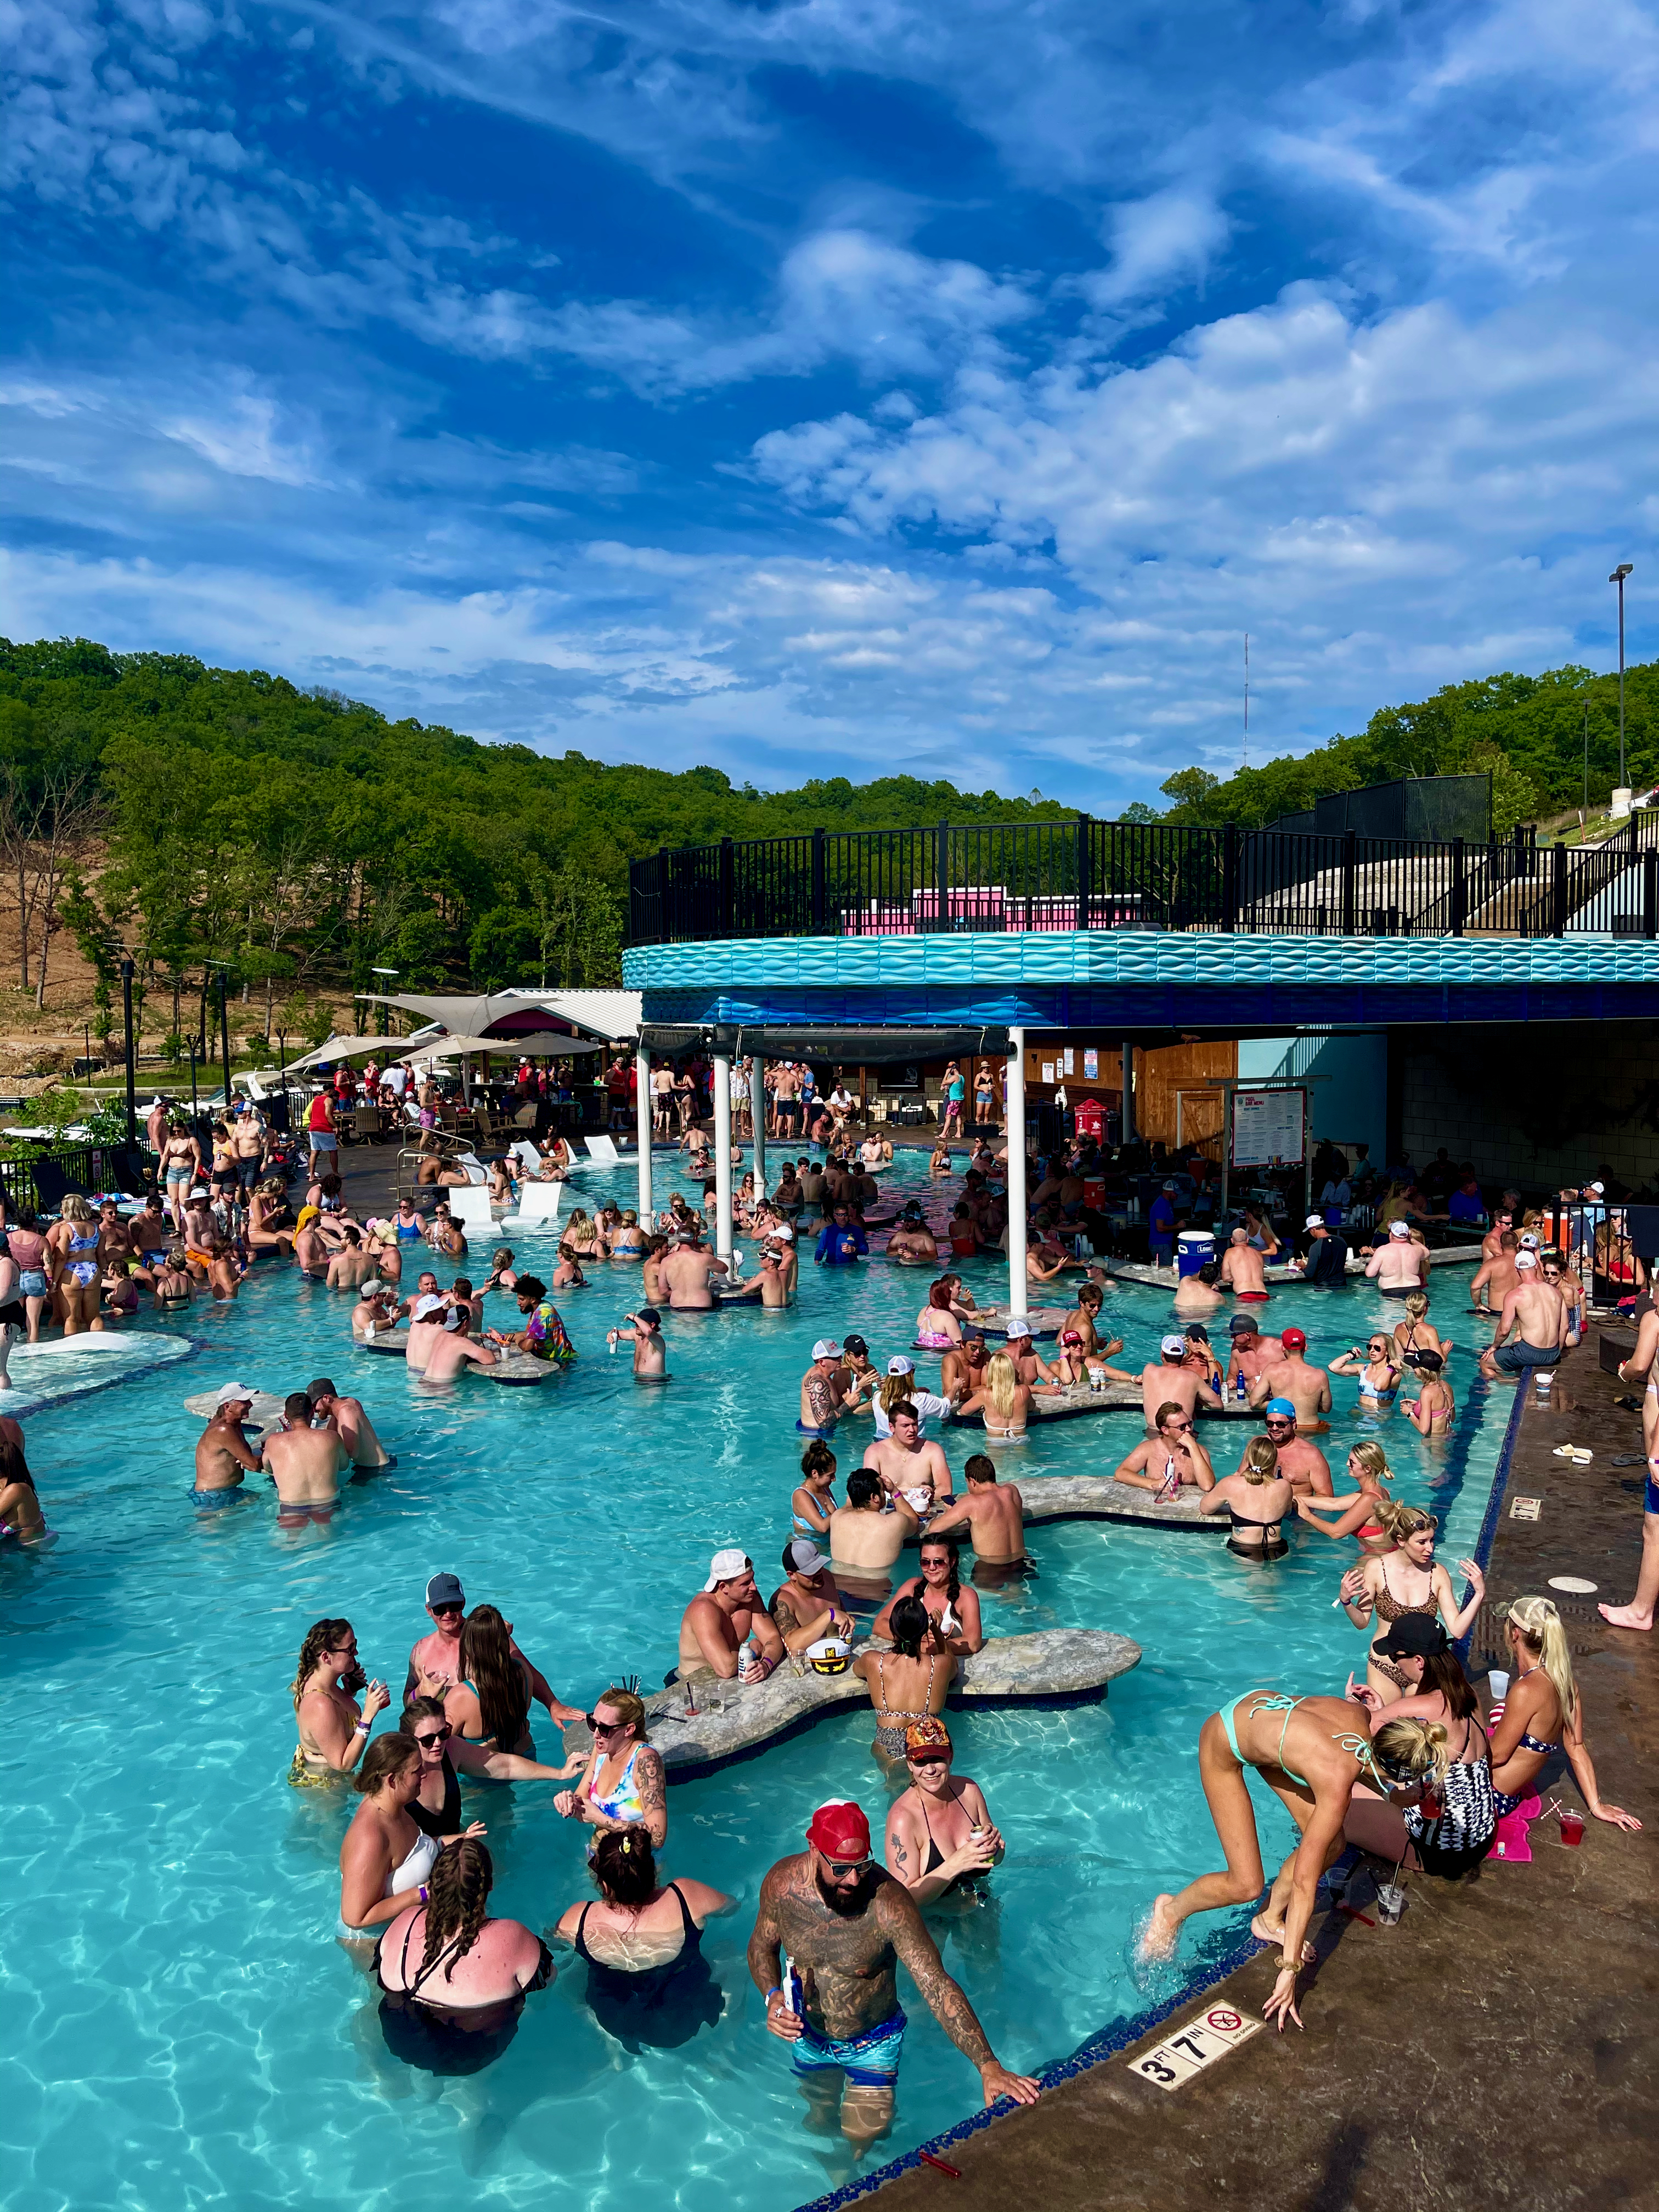 Pool party at Backwater Jack's on Lake of the Ozarks